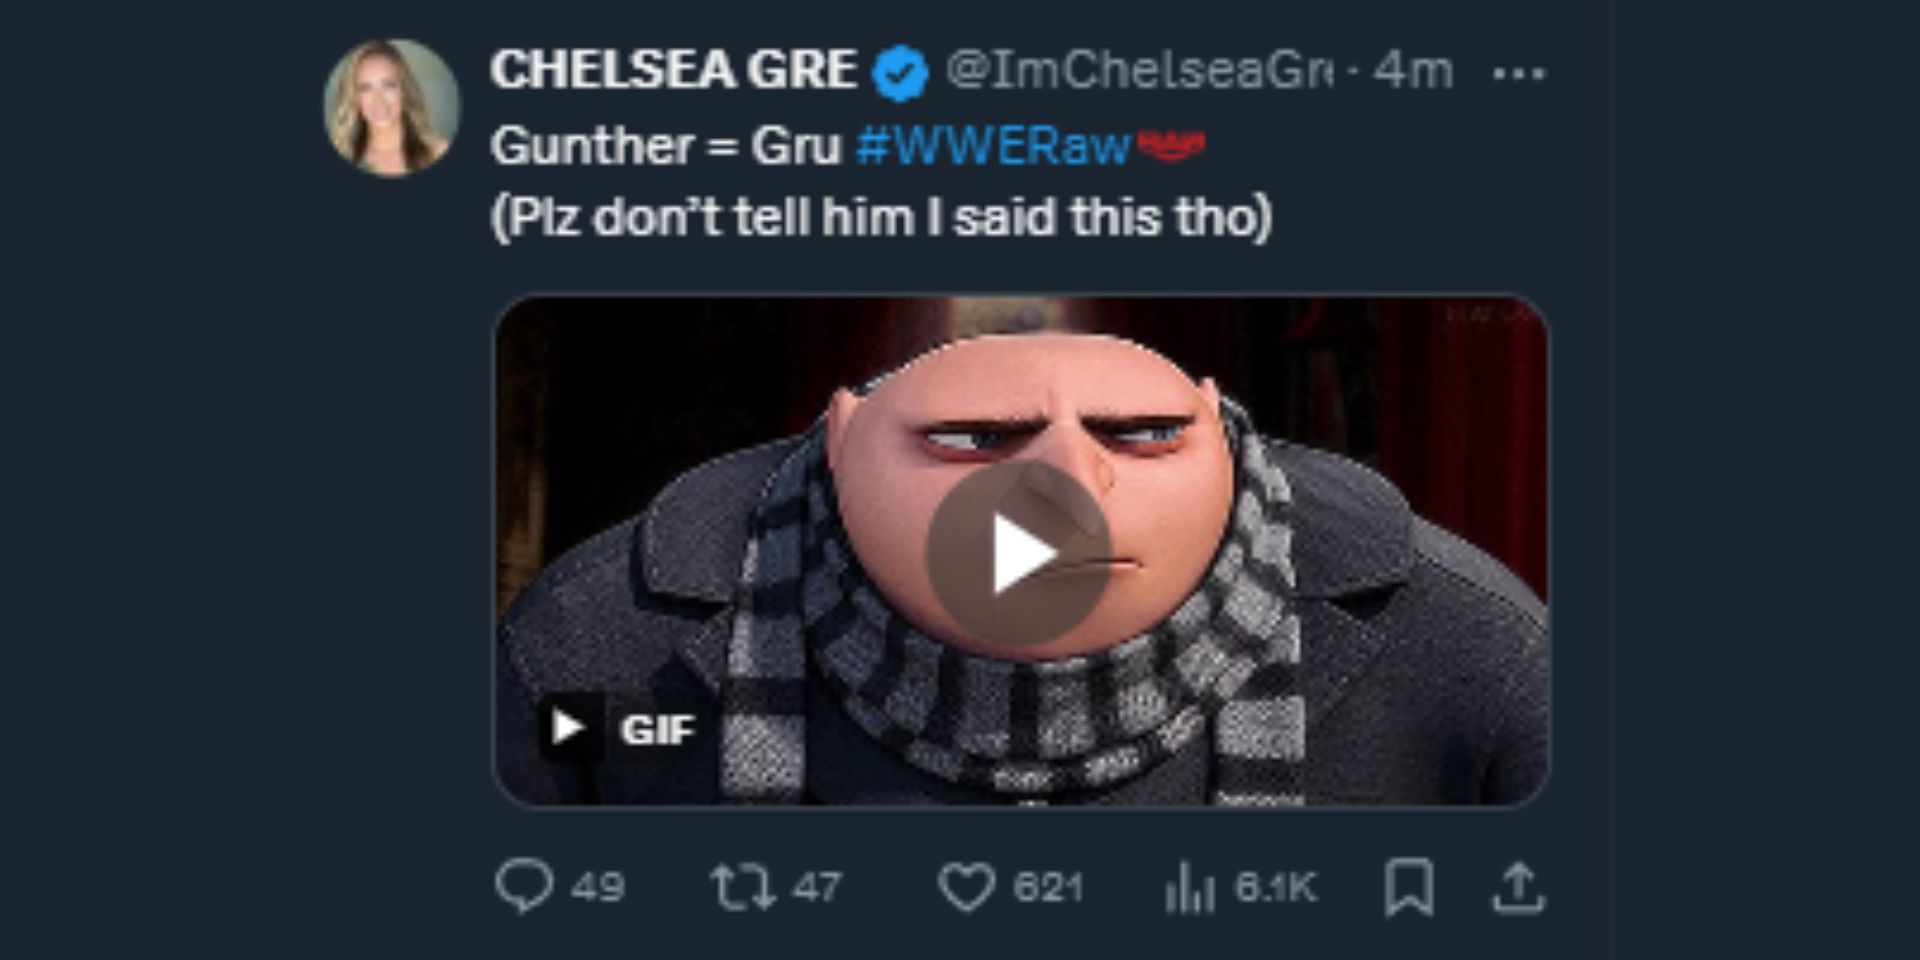 Here&#039;s the screengrab of Chelsea Green comparing Gunther to Gru